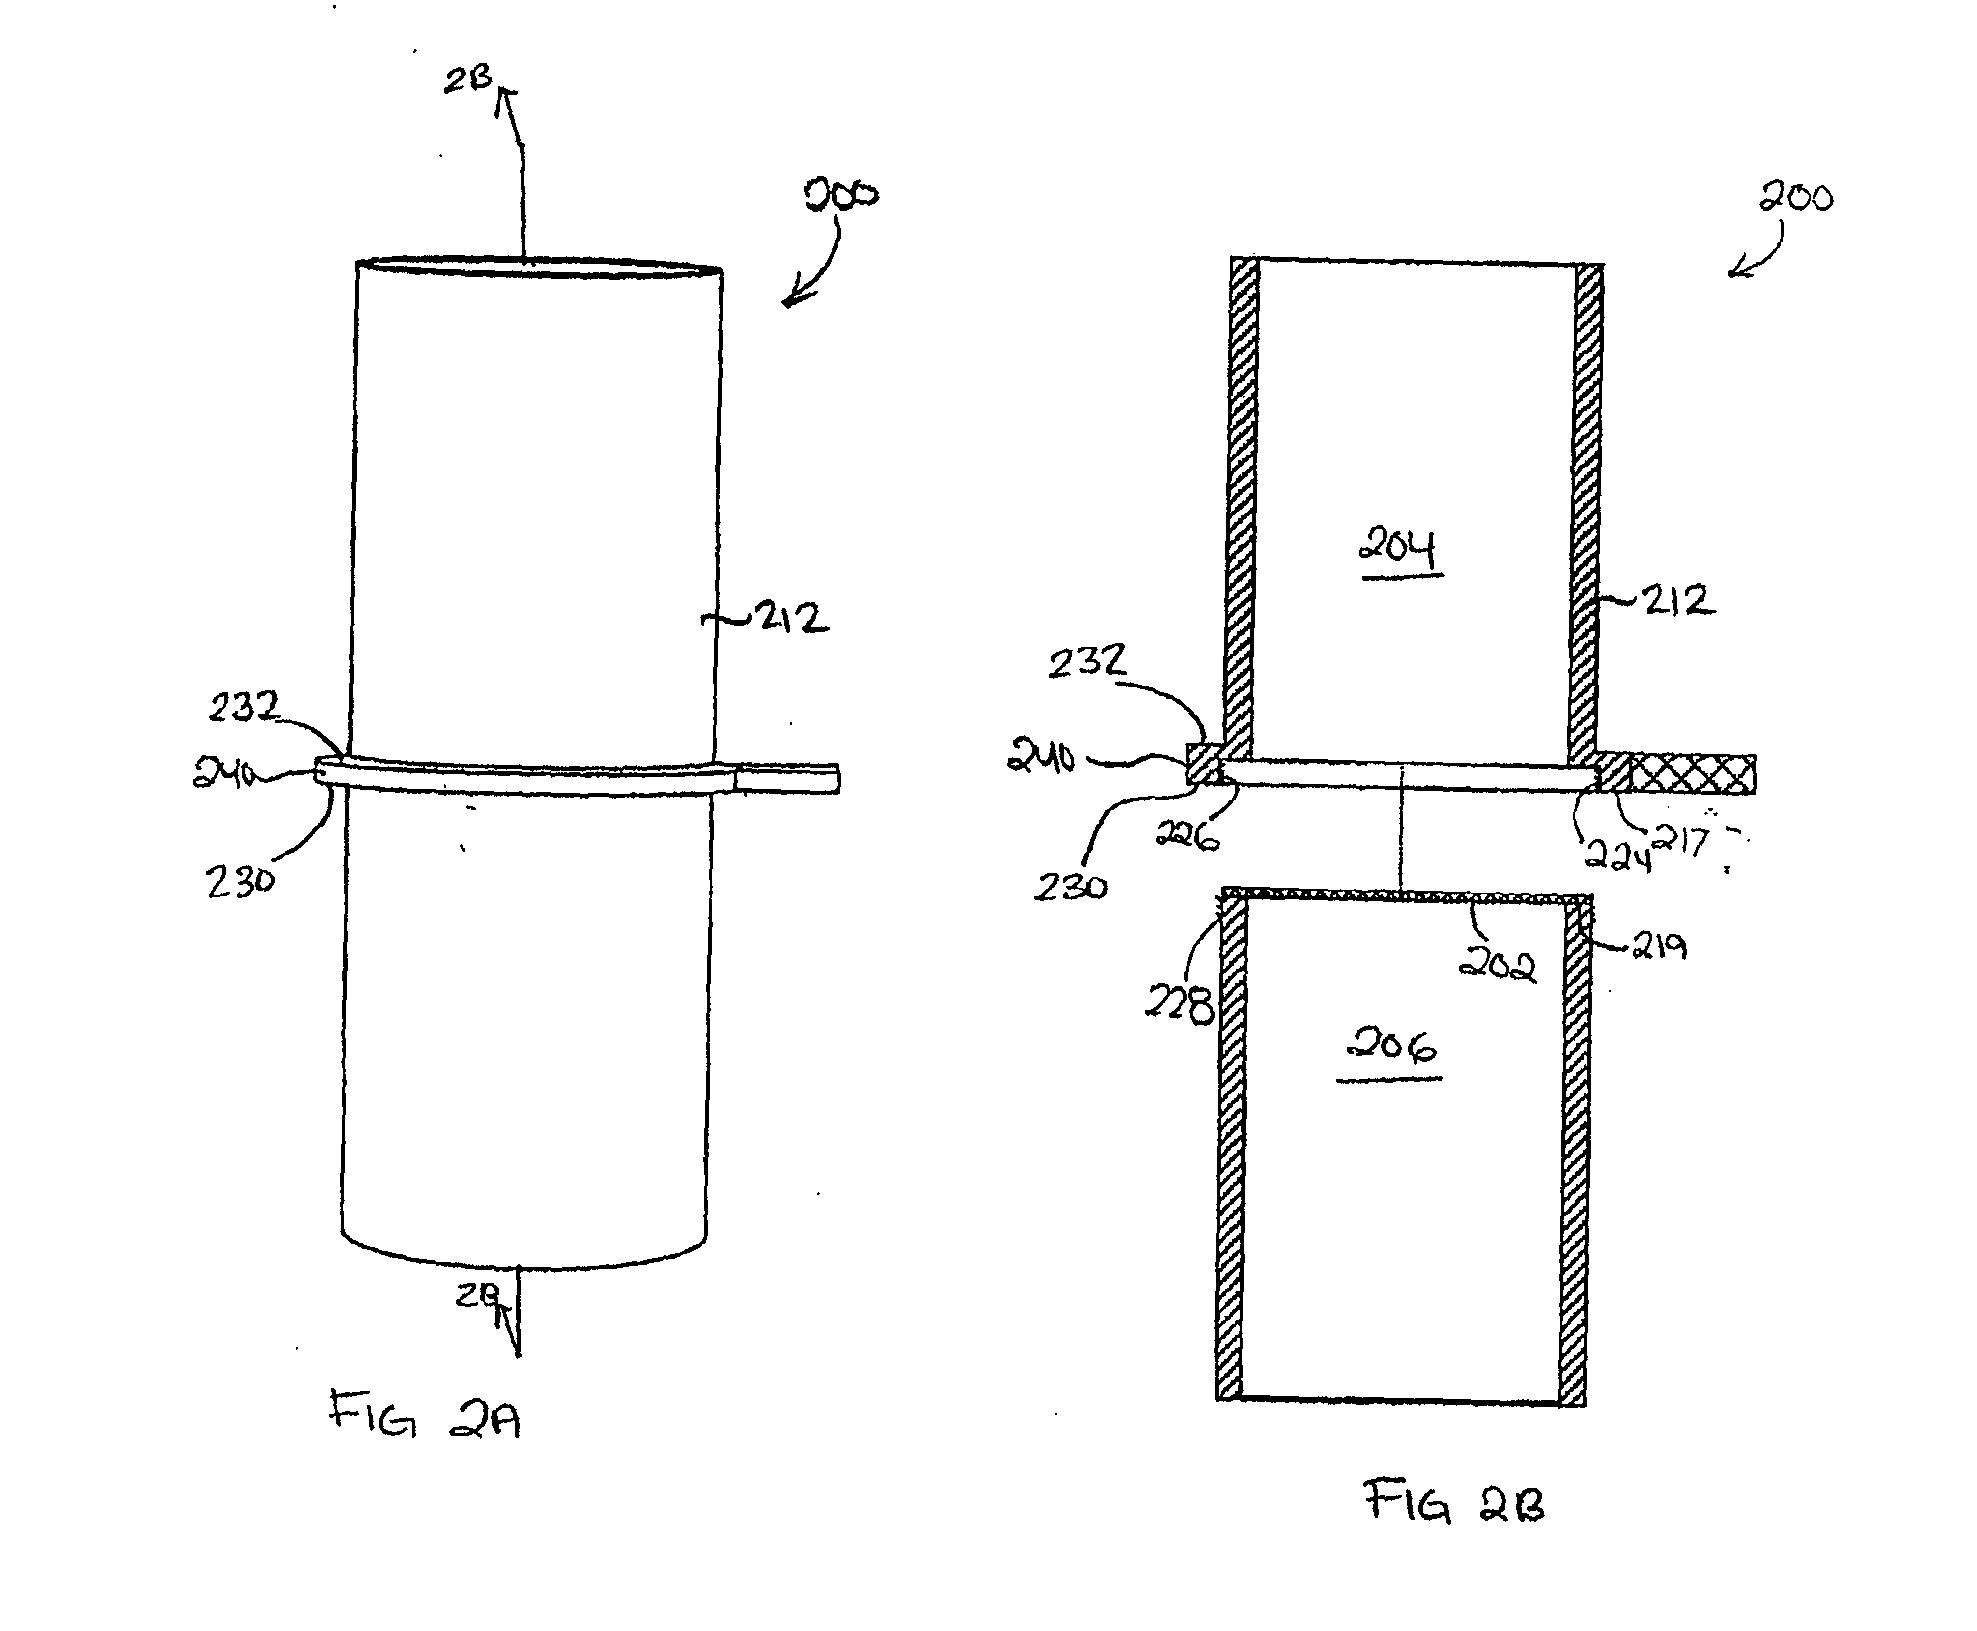 Filter apparatus and filter plate system